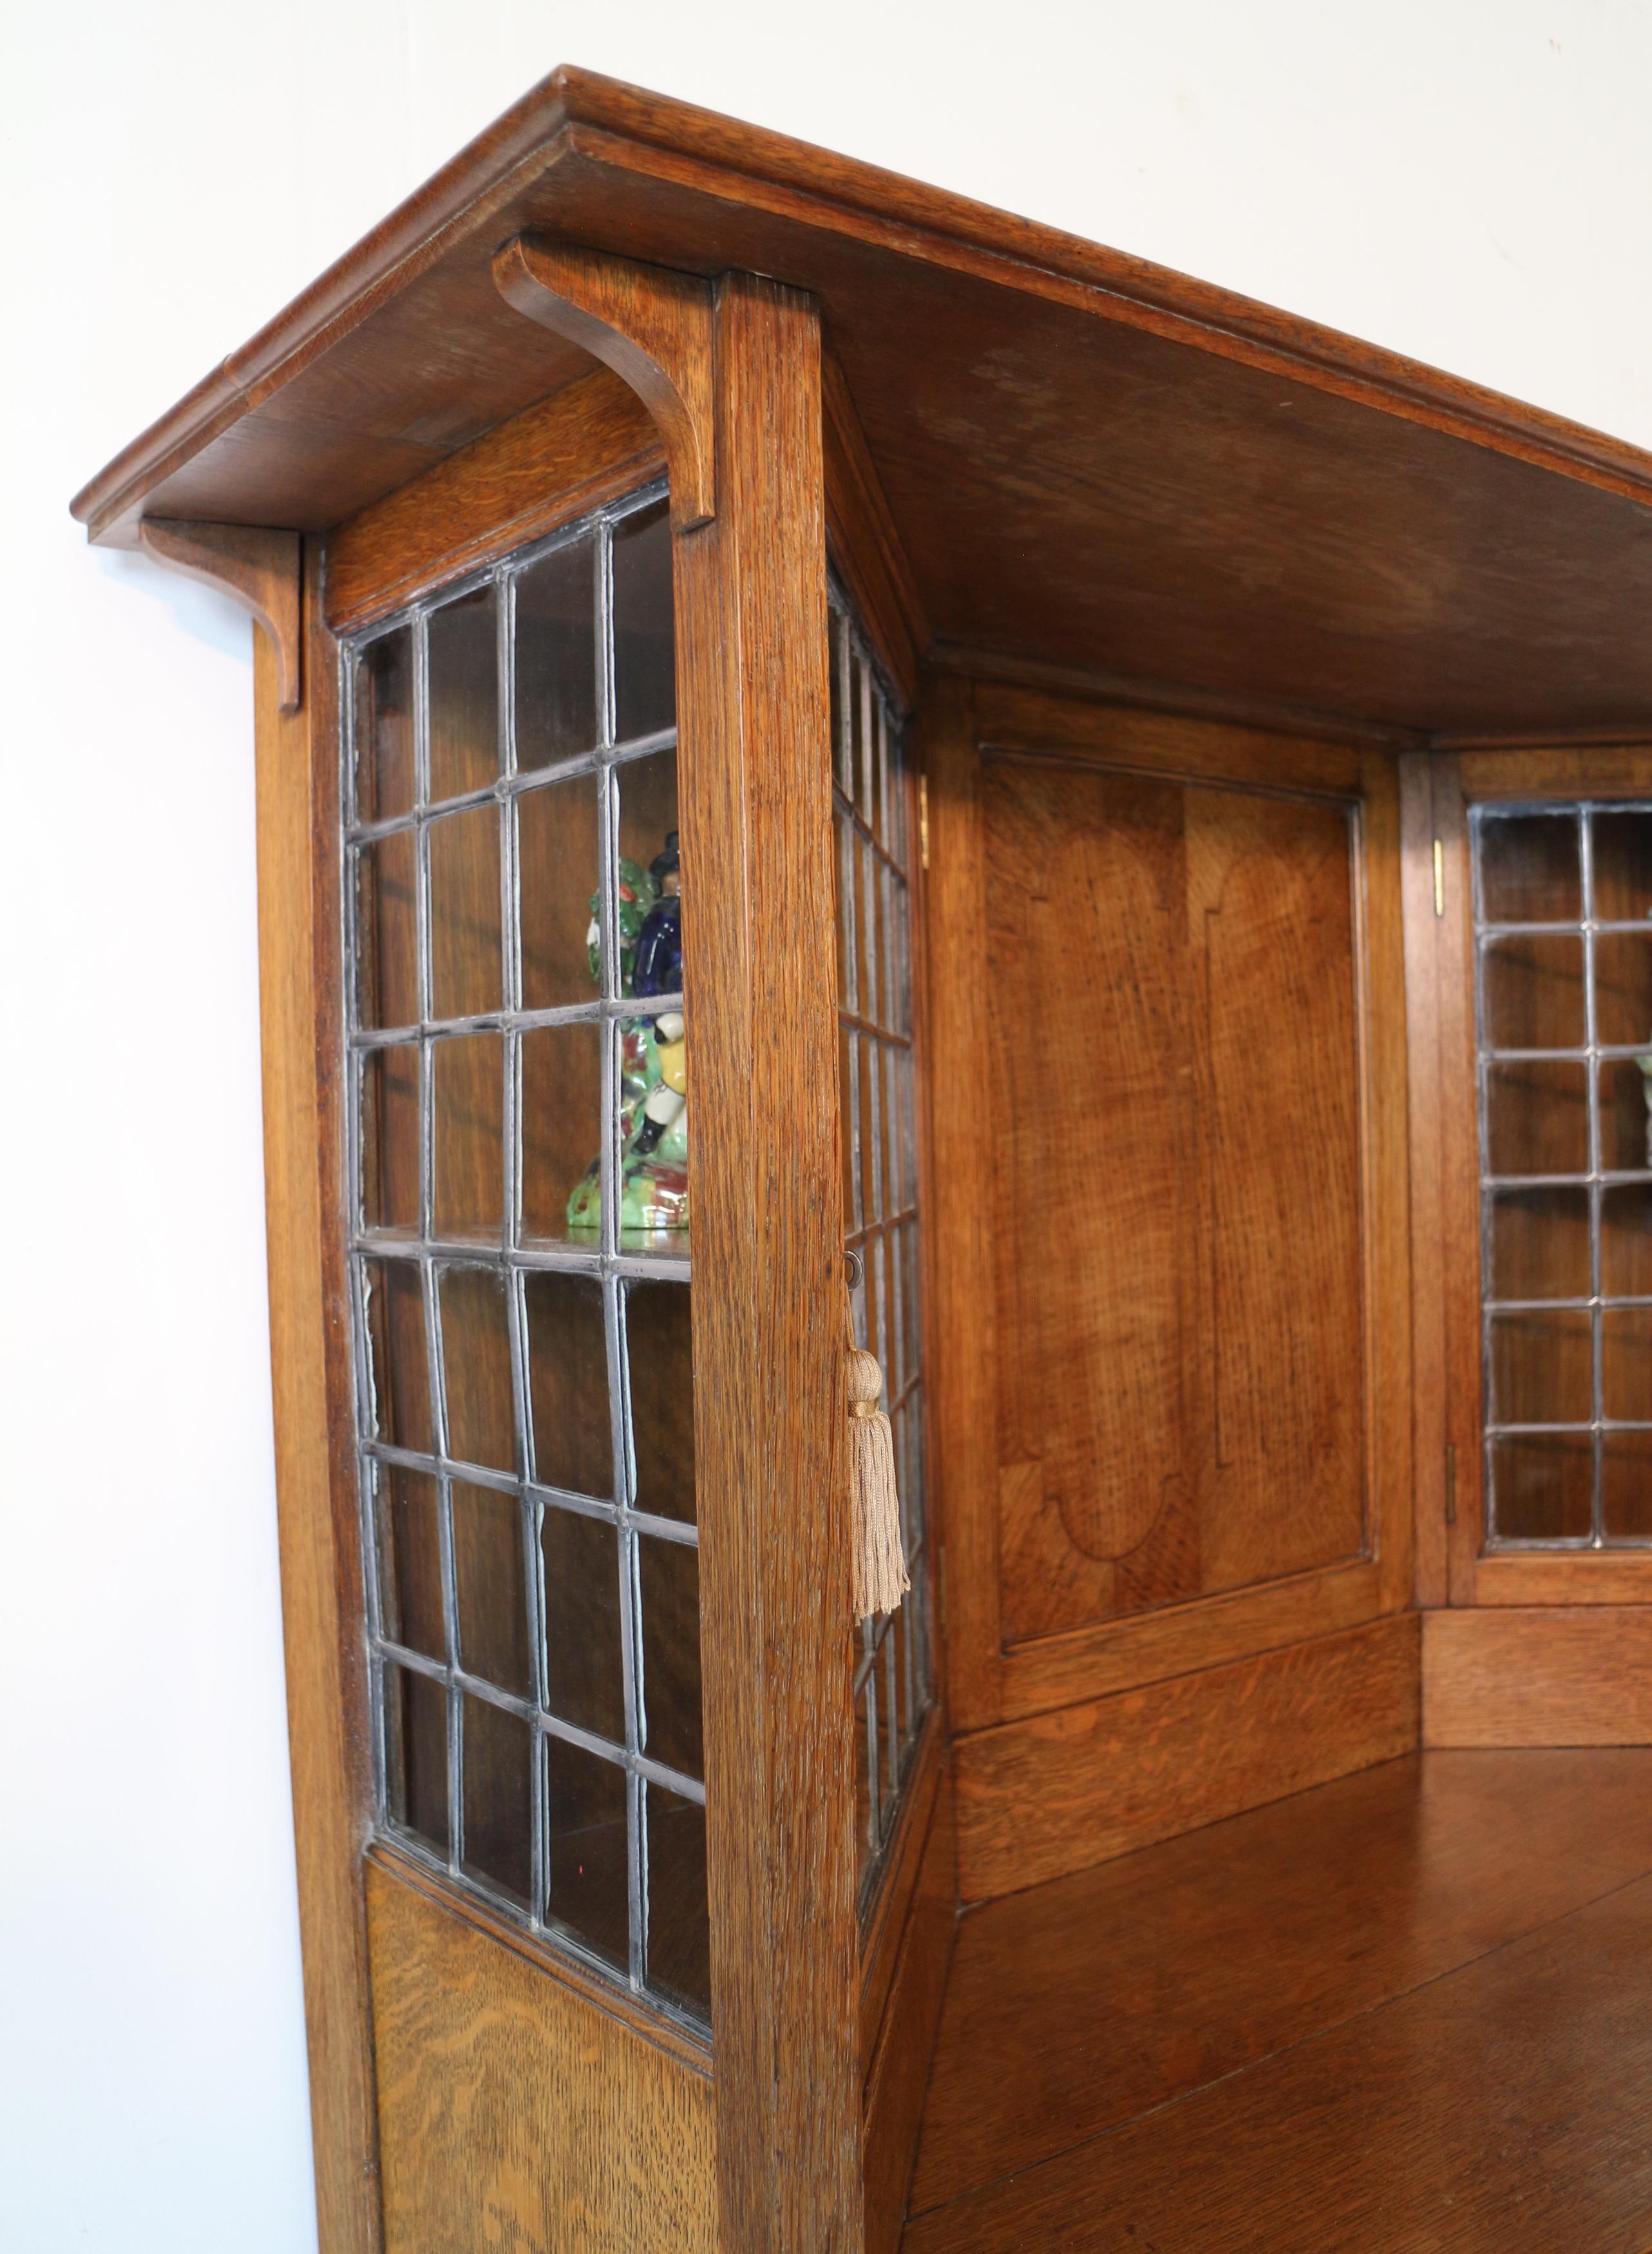 Hand-Crafted Antique English Bath Cabinet Makers Arts & Crafts Oak & Inlaid Sideboard Cabinet